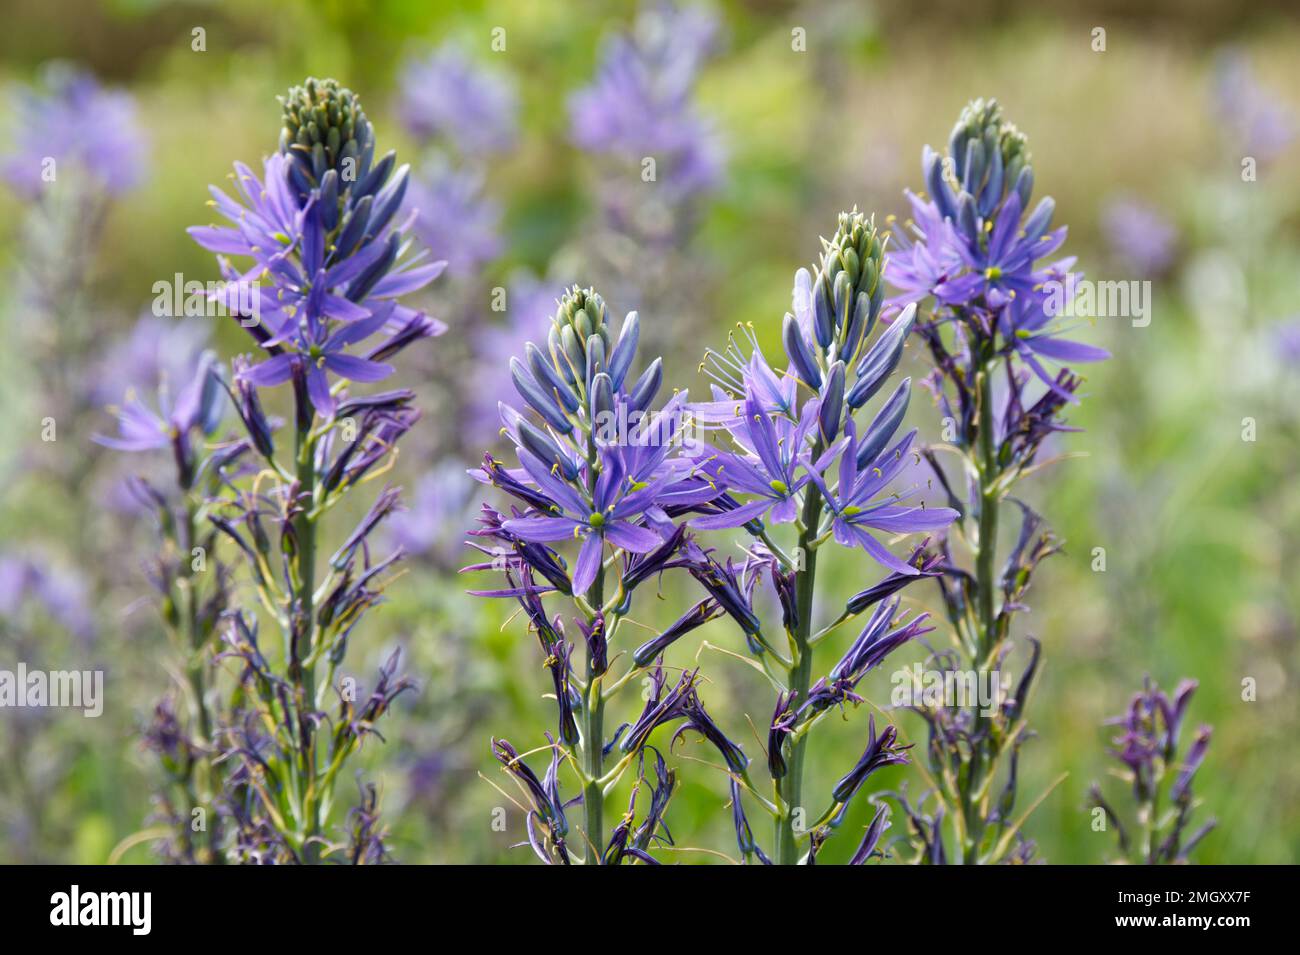 Spring flowering blue cammassias growing in a meadow setting in a UK garden May Stock Photo